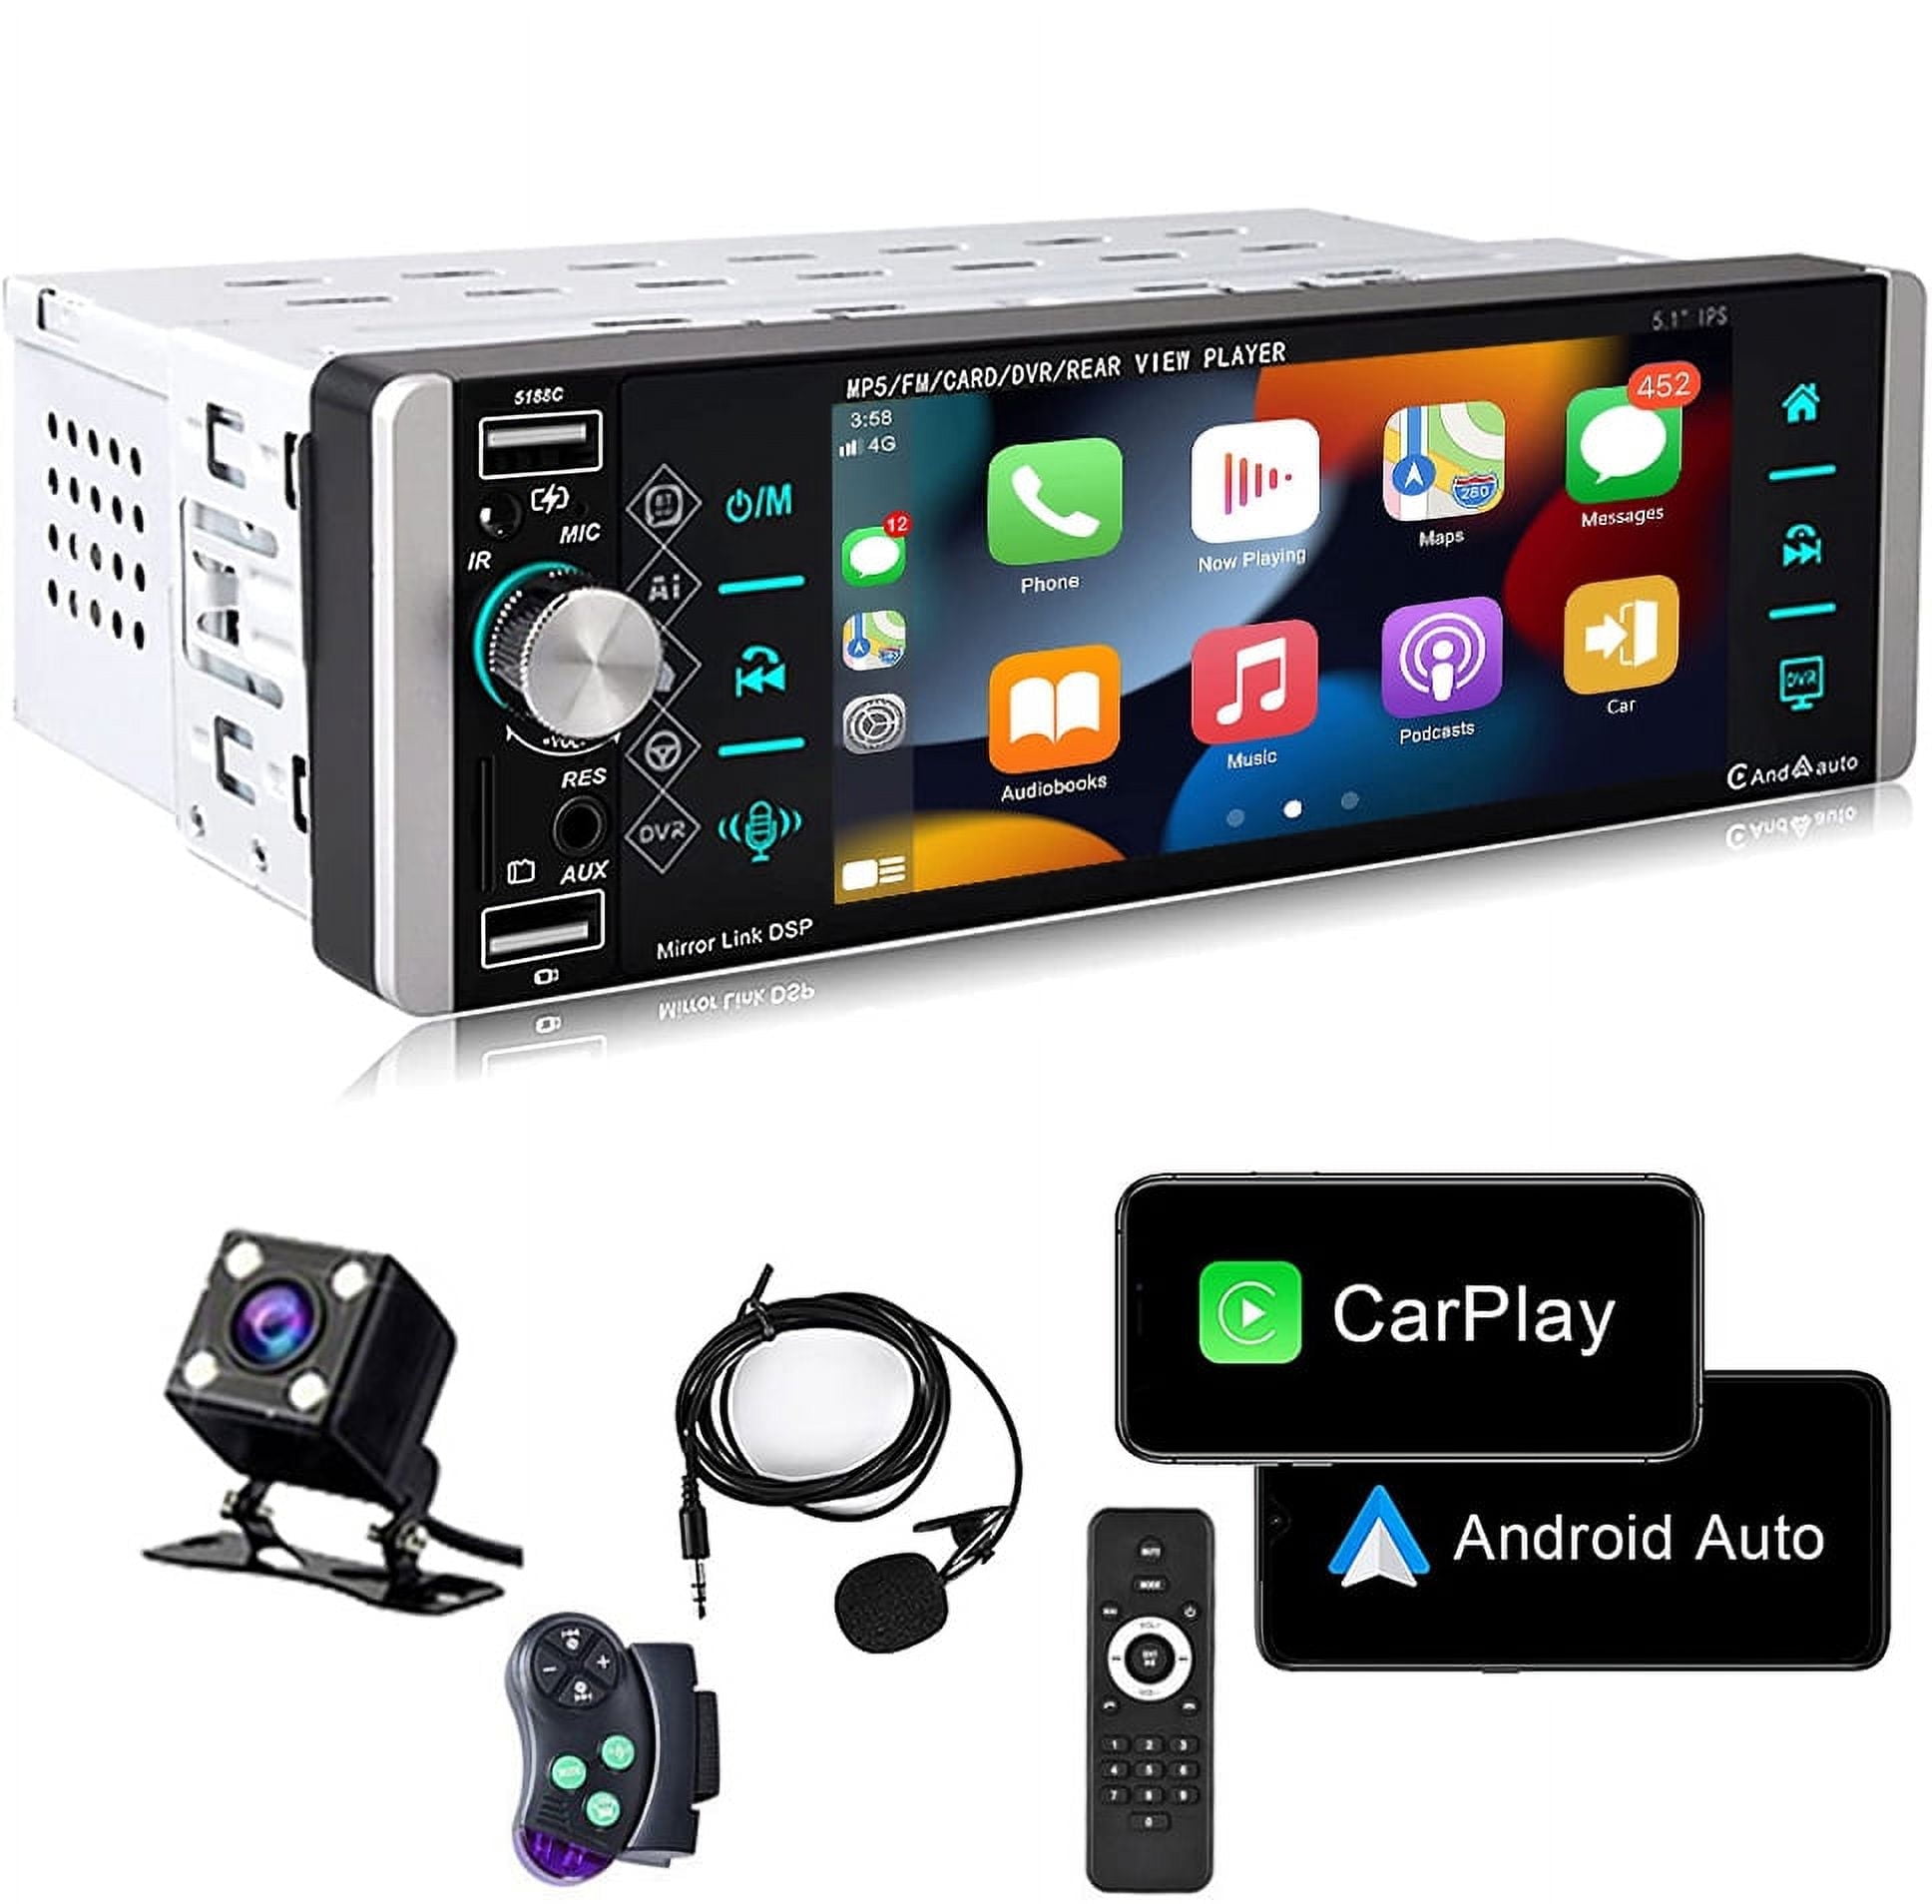 5 Inch Carplay Monitor 1 DIN Auto Radio Android Auto Bluetooth MP5  Multimedia Player Car Stereo Video GPS Navigation Bluetooth Mirror Link  From Hugotone02, $84.58